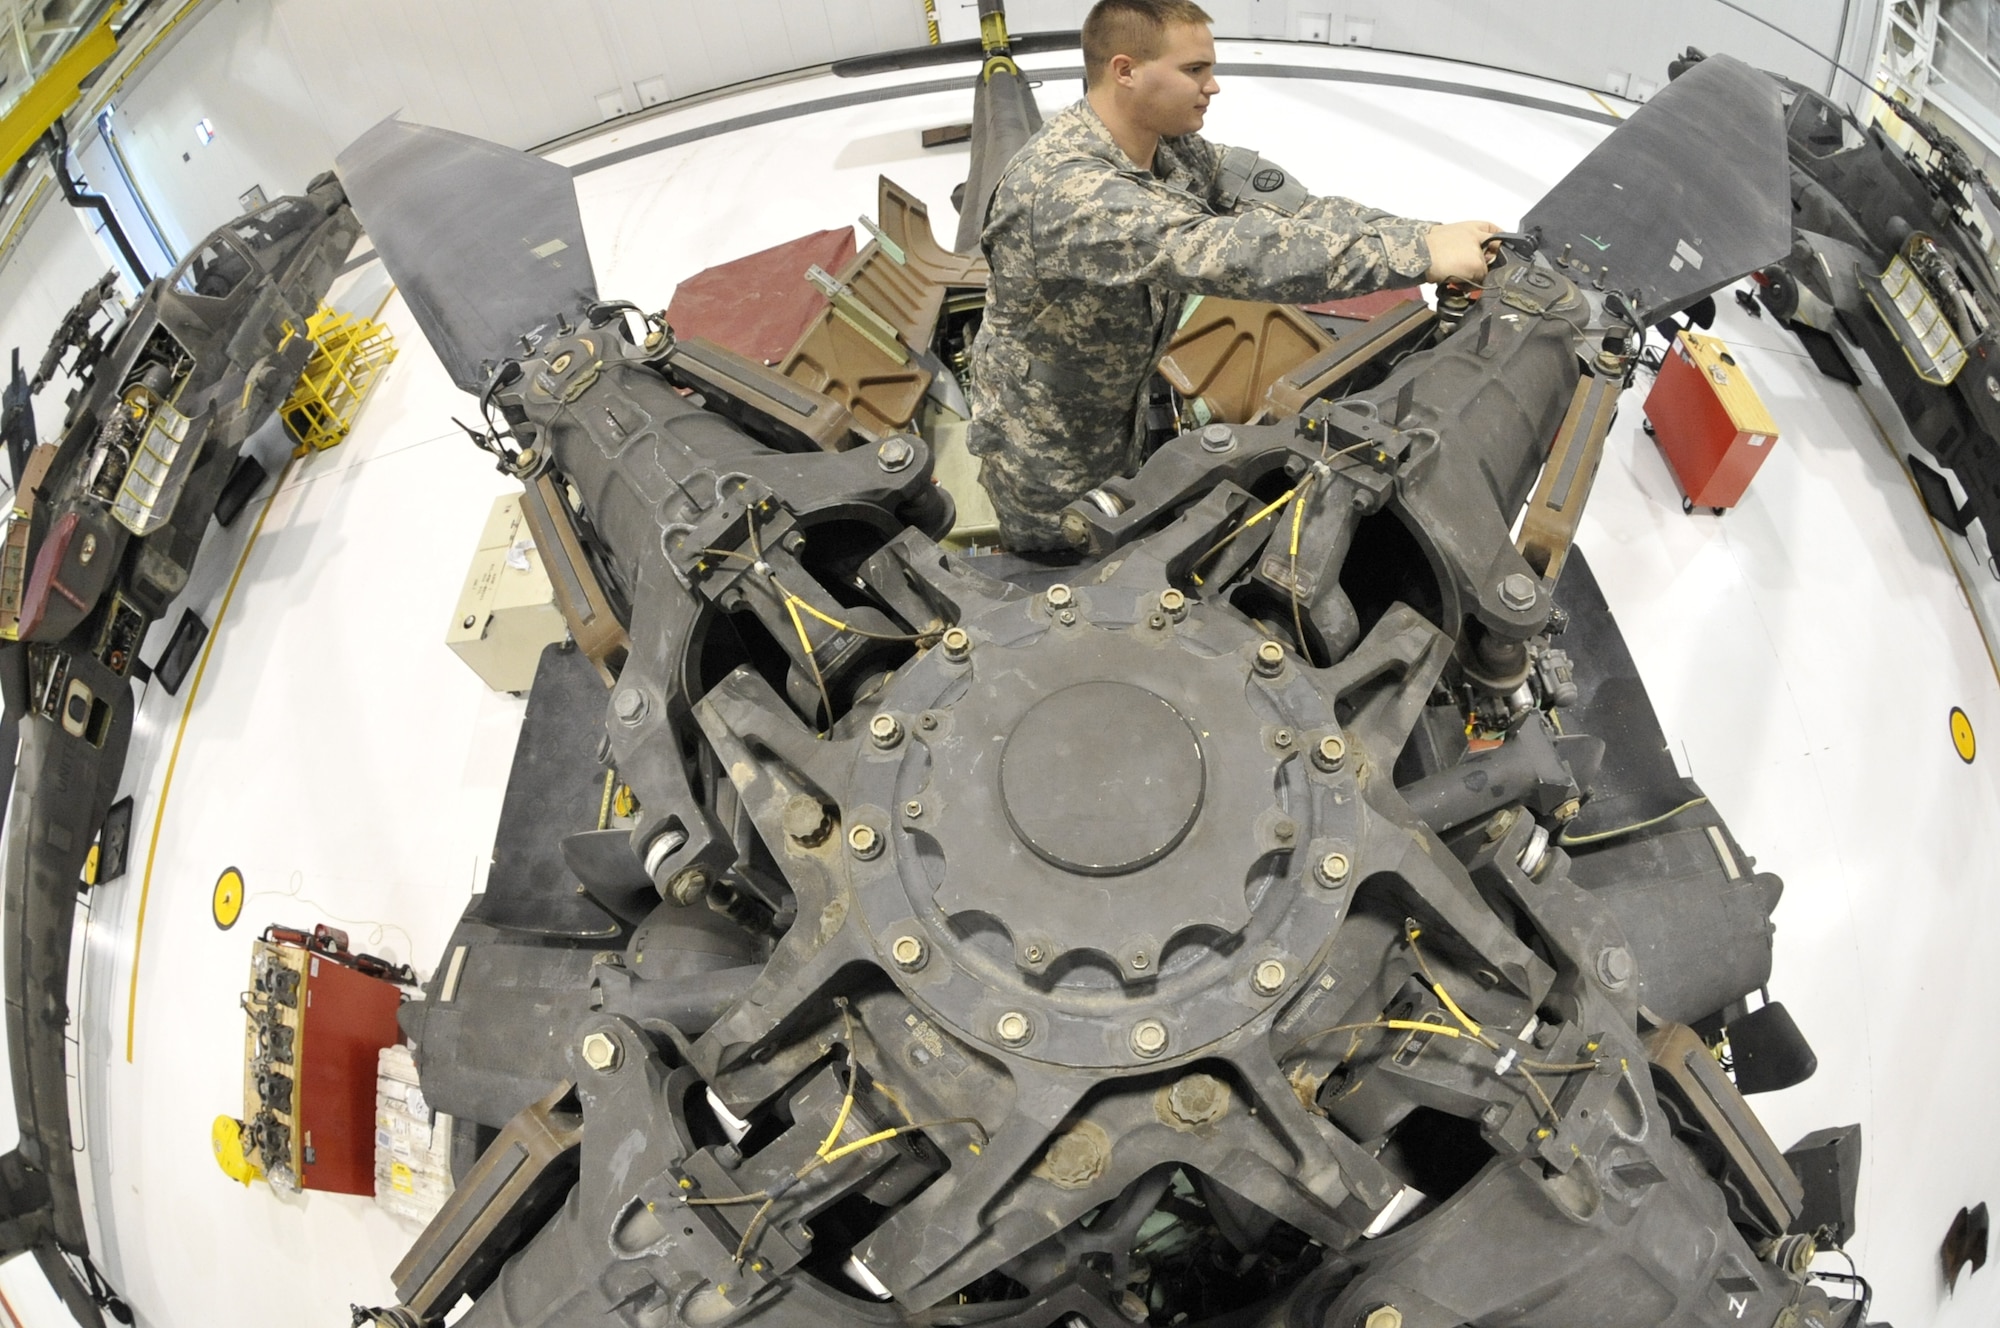 U.S. Army Spc. Todd Gann, 1-135th Attack/Reconnaissance Battalion aircraft maintainer, inspects the main rotor head of an AH-64 Apache at Whiteman Air Force Base, Mo., Jan. 9, 2014. Soldiers perform this inspection annually to ensure there are no signs of corrosion developing, which could cause malfunctions. (U.S. Air Force photo by Airman 1st Class Keenan Berry/Released)